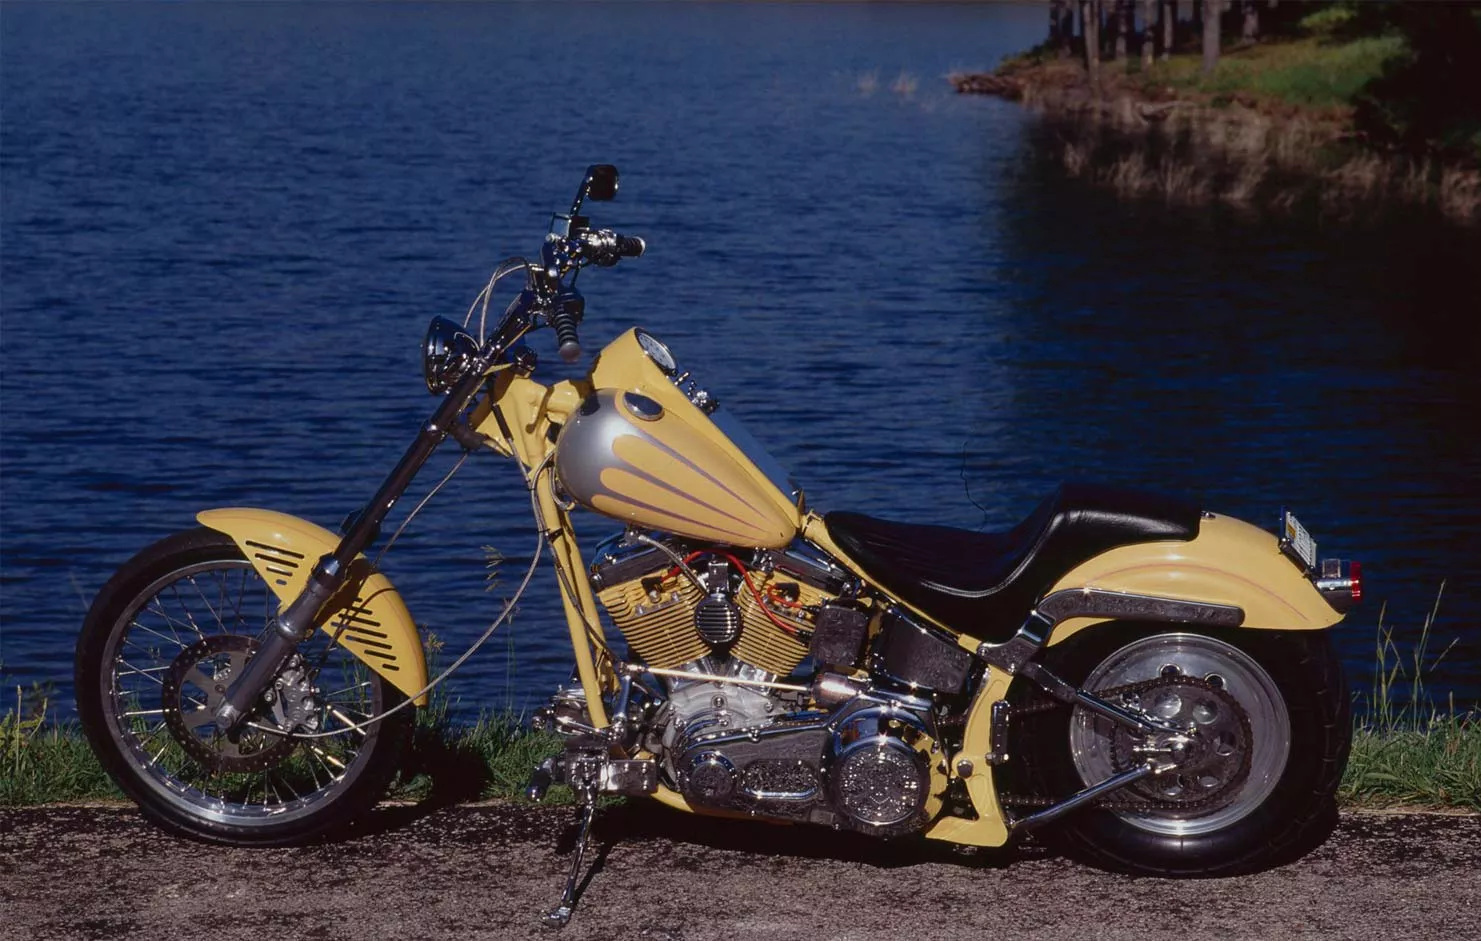 Actor, musician, and bike builder Rusty Coones painted this mustard/silver 1987 Softail.